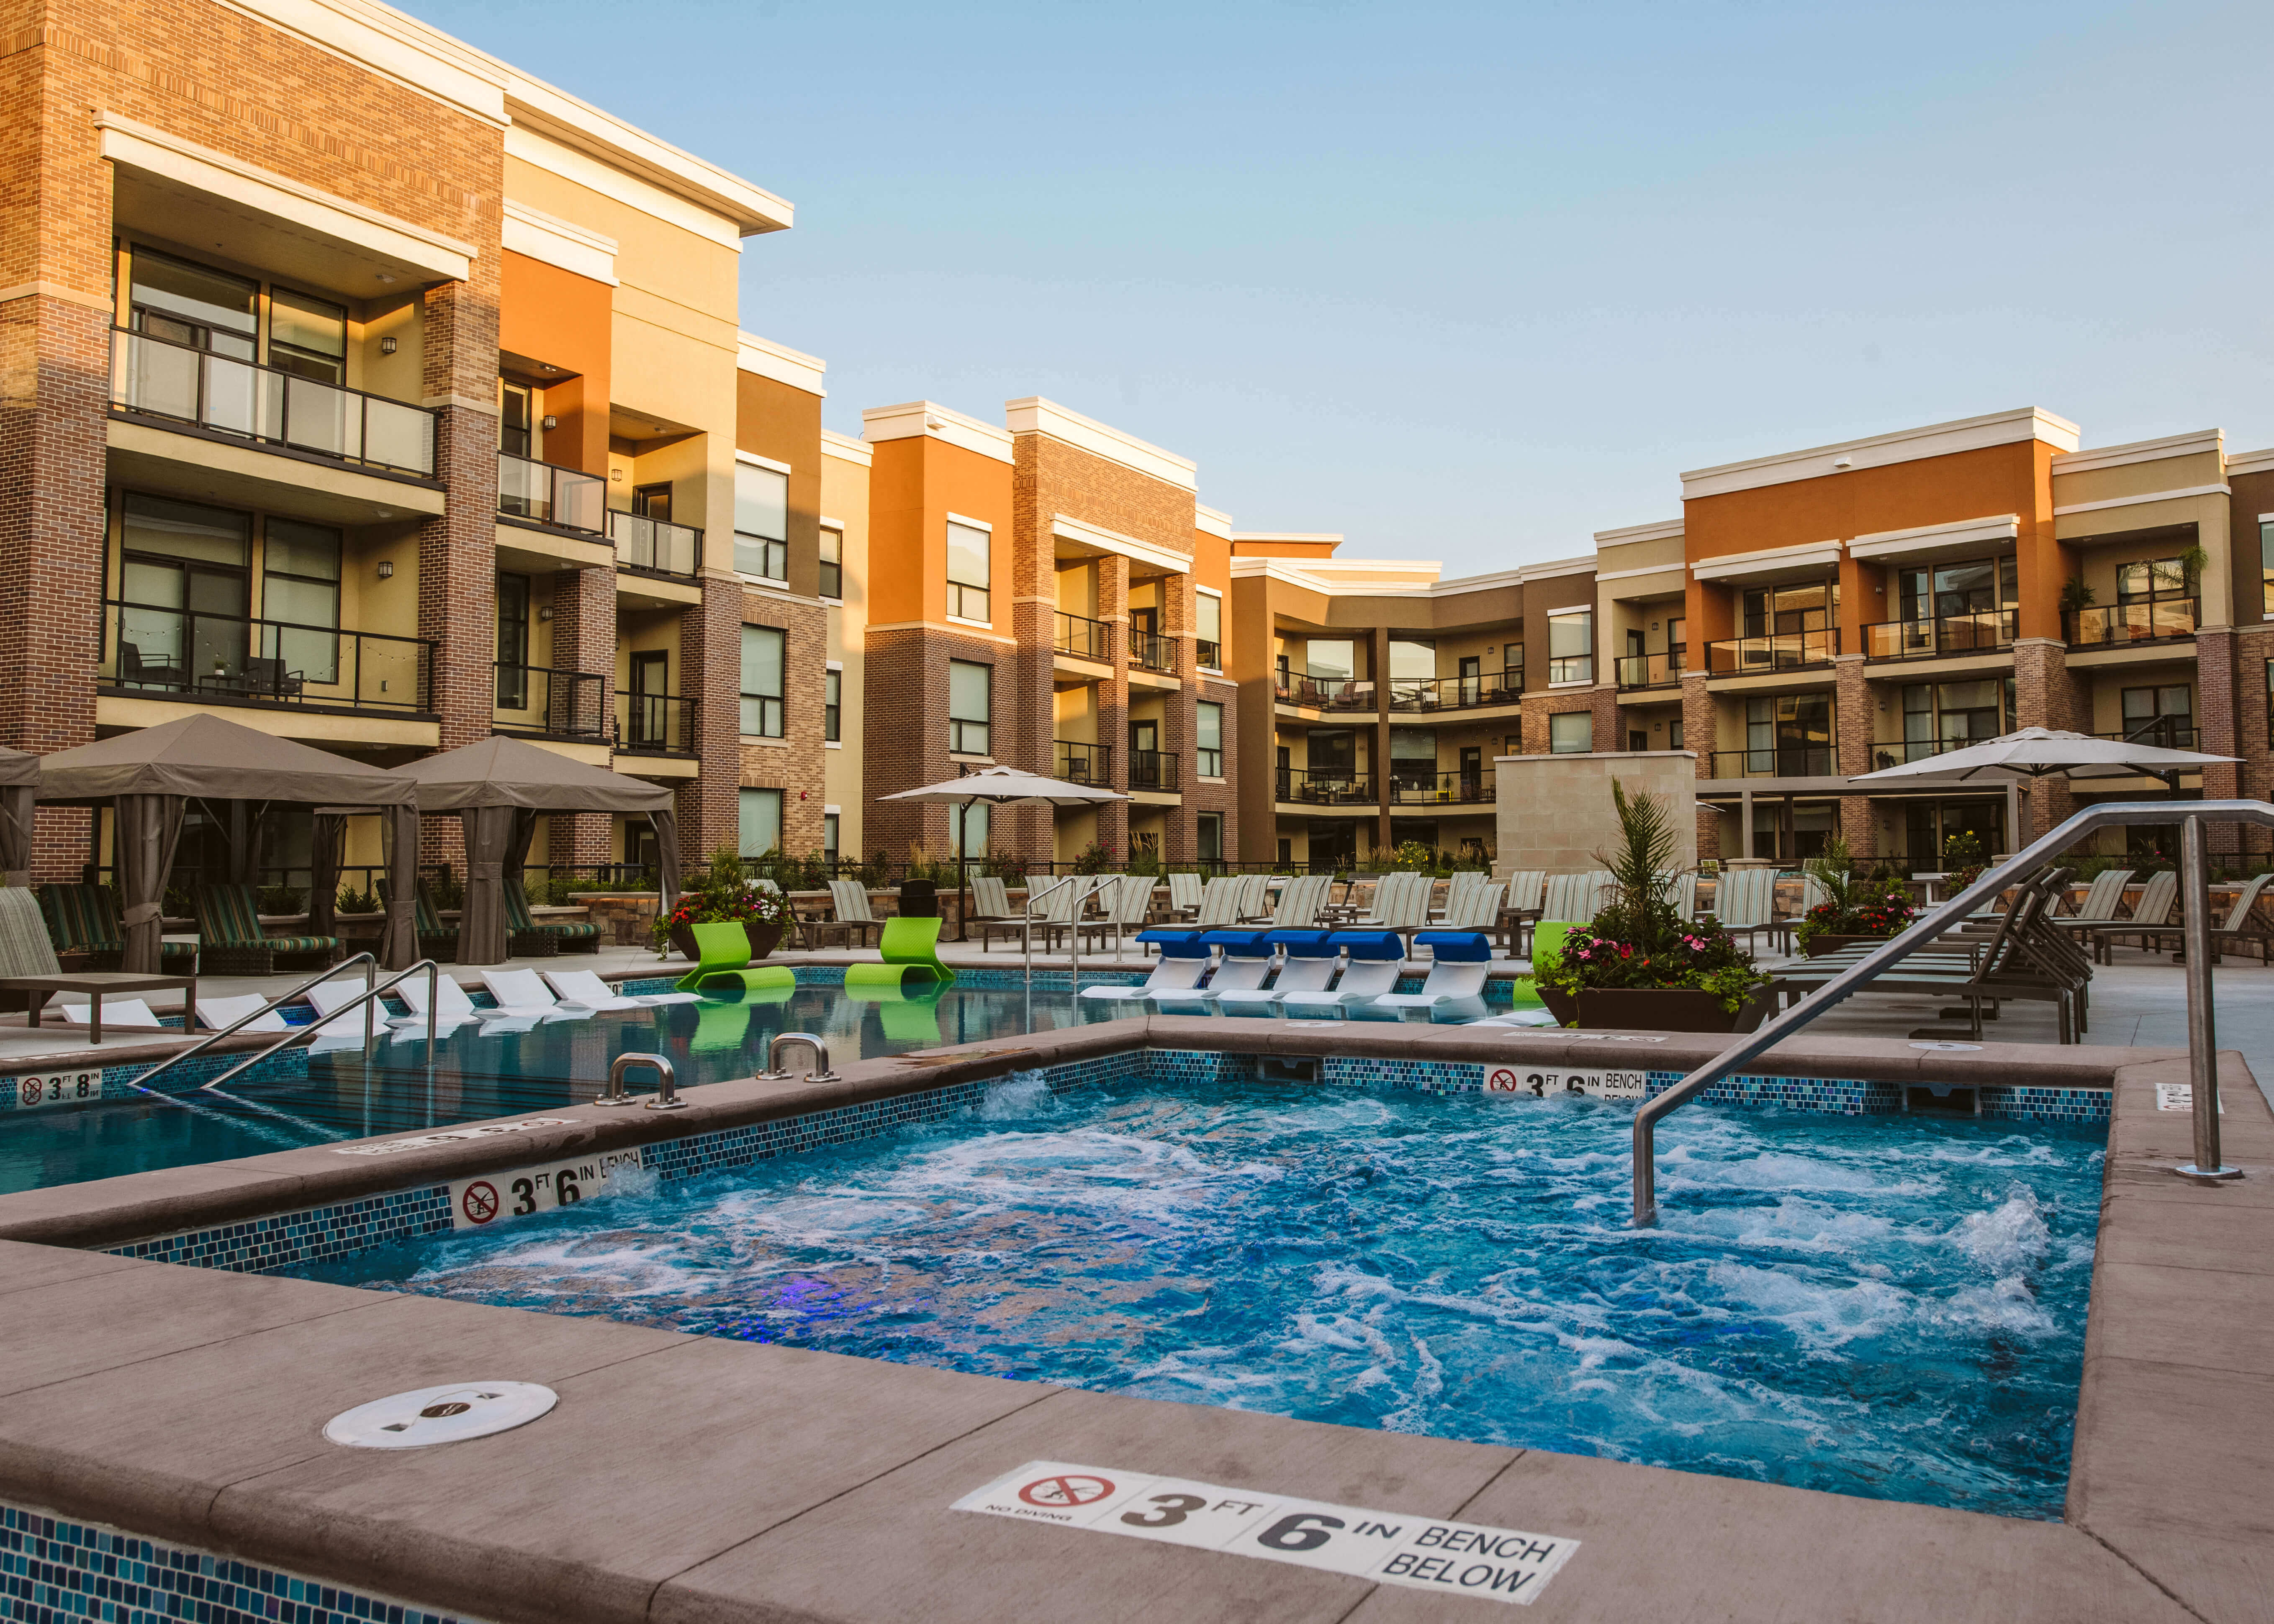 Apartments Overland Park